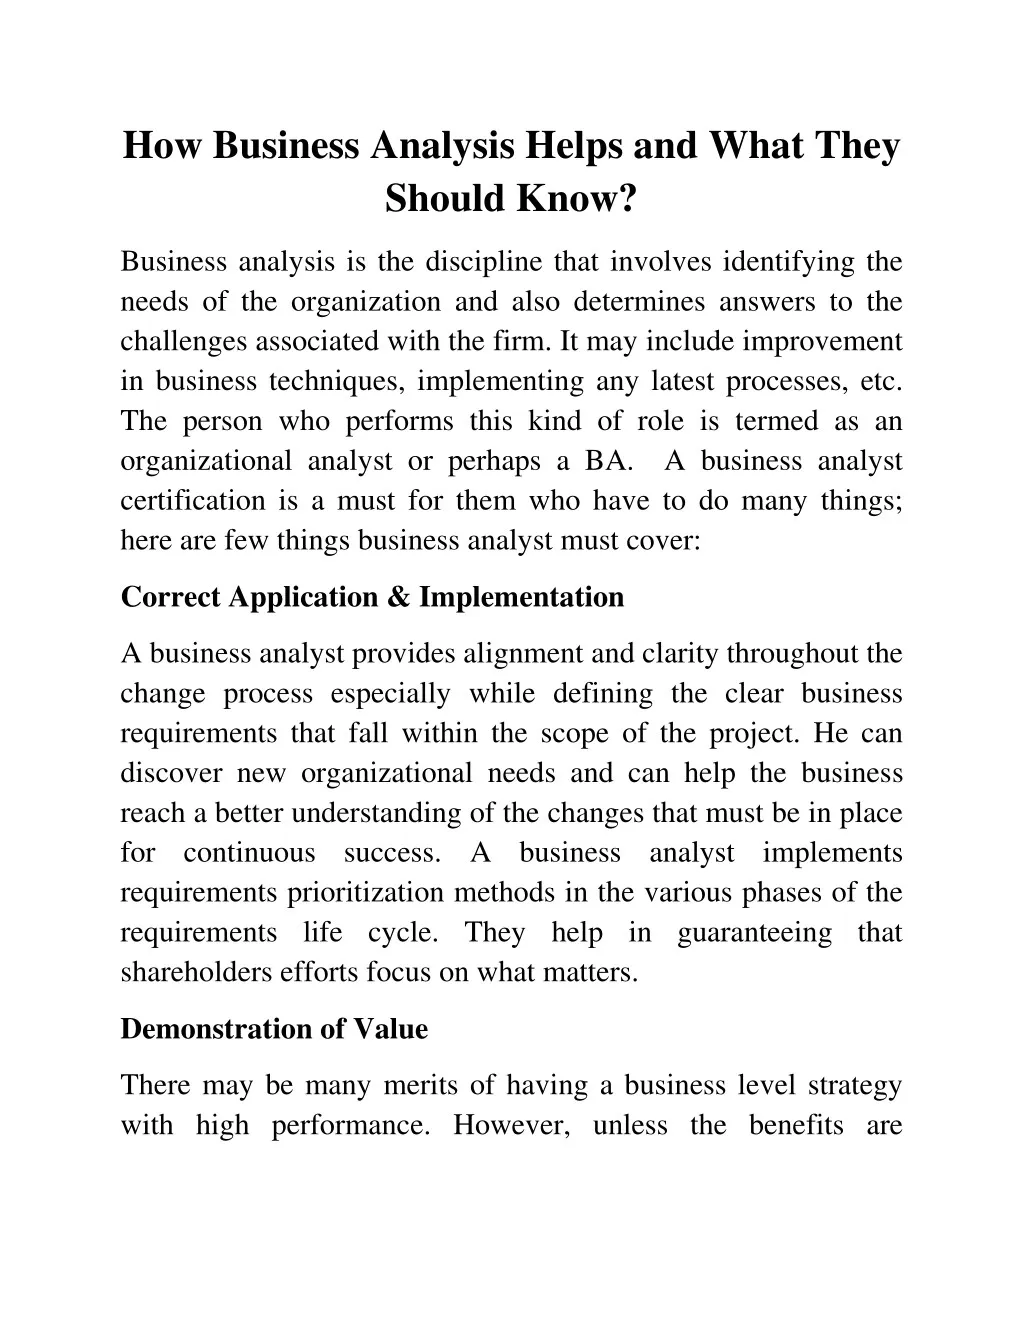 how business analysis helps and what they should